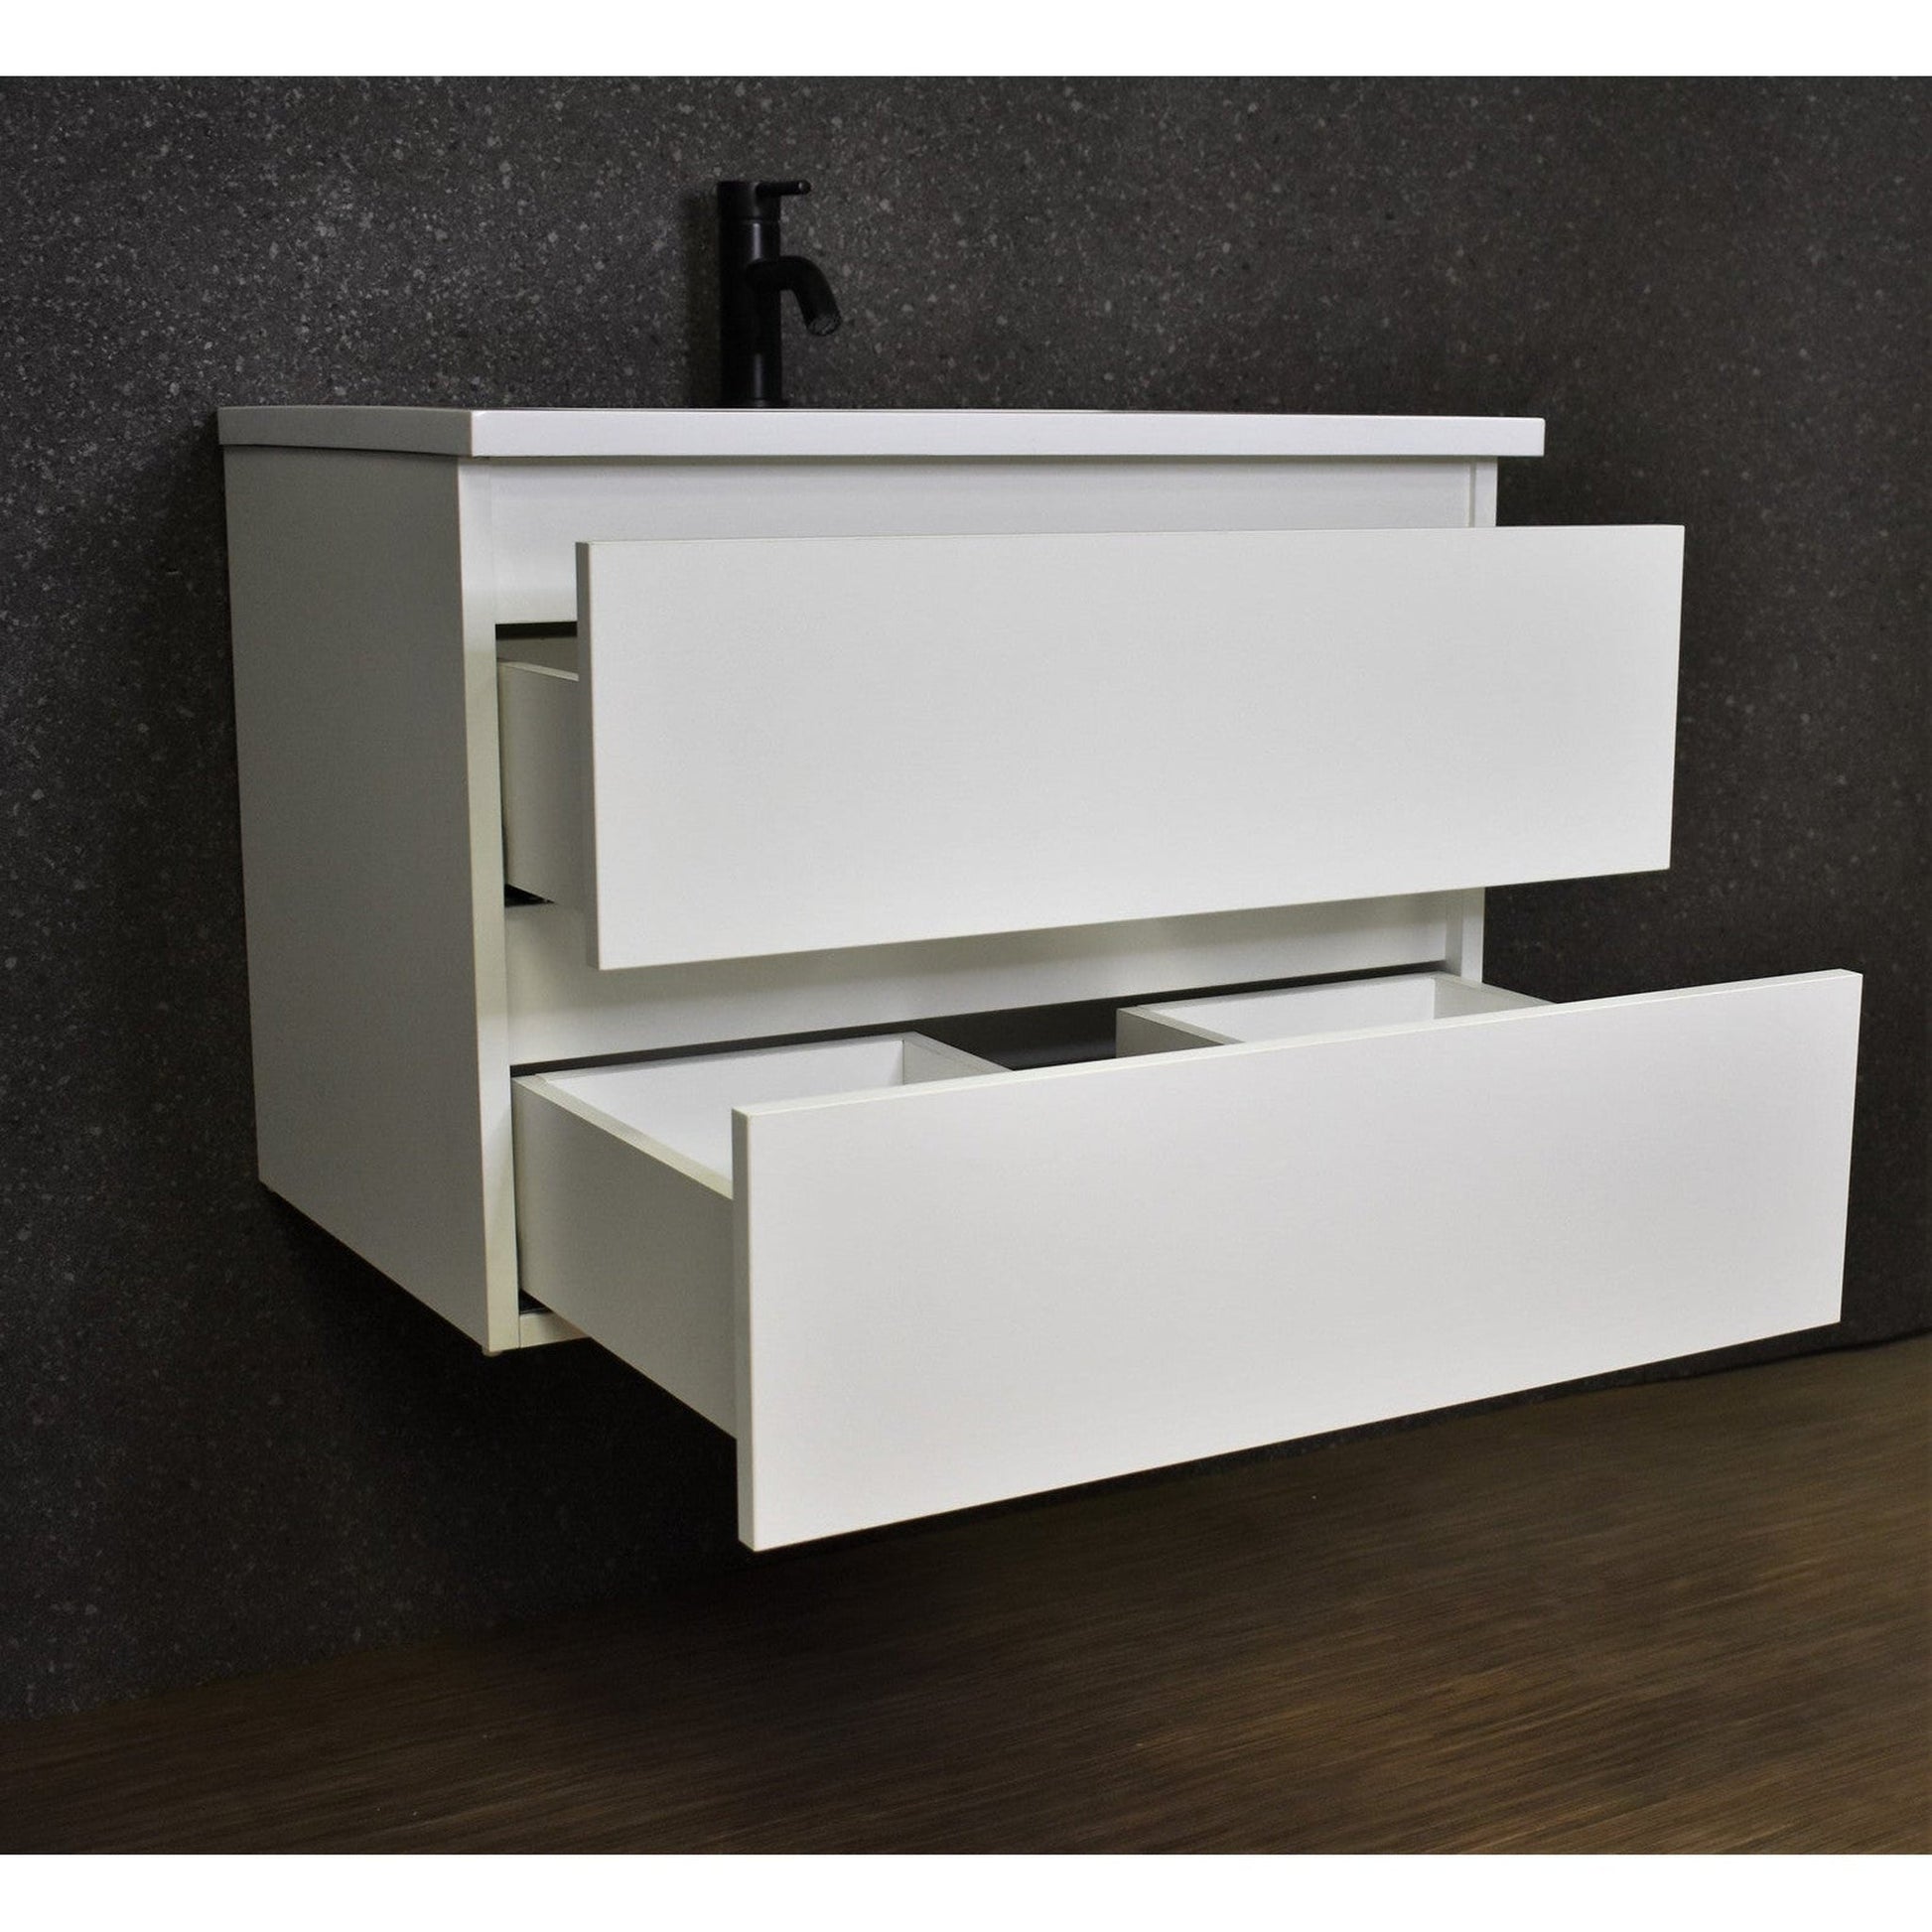 Volpa USA Salt 30" x 20" Glossy White Wall-Mounted Floating Bathroom Vanity With Drawers, Acrylic Top and Integrated Acrylic Sink